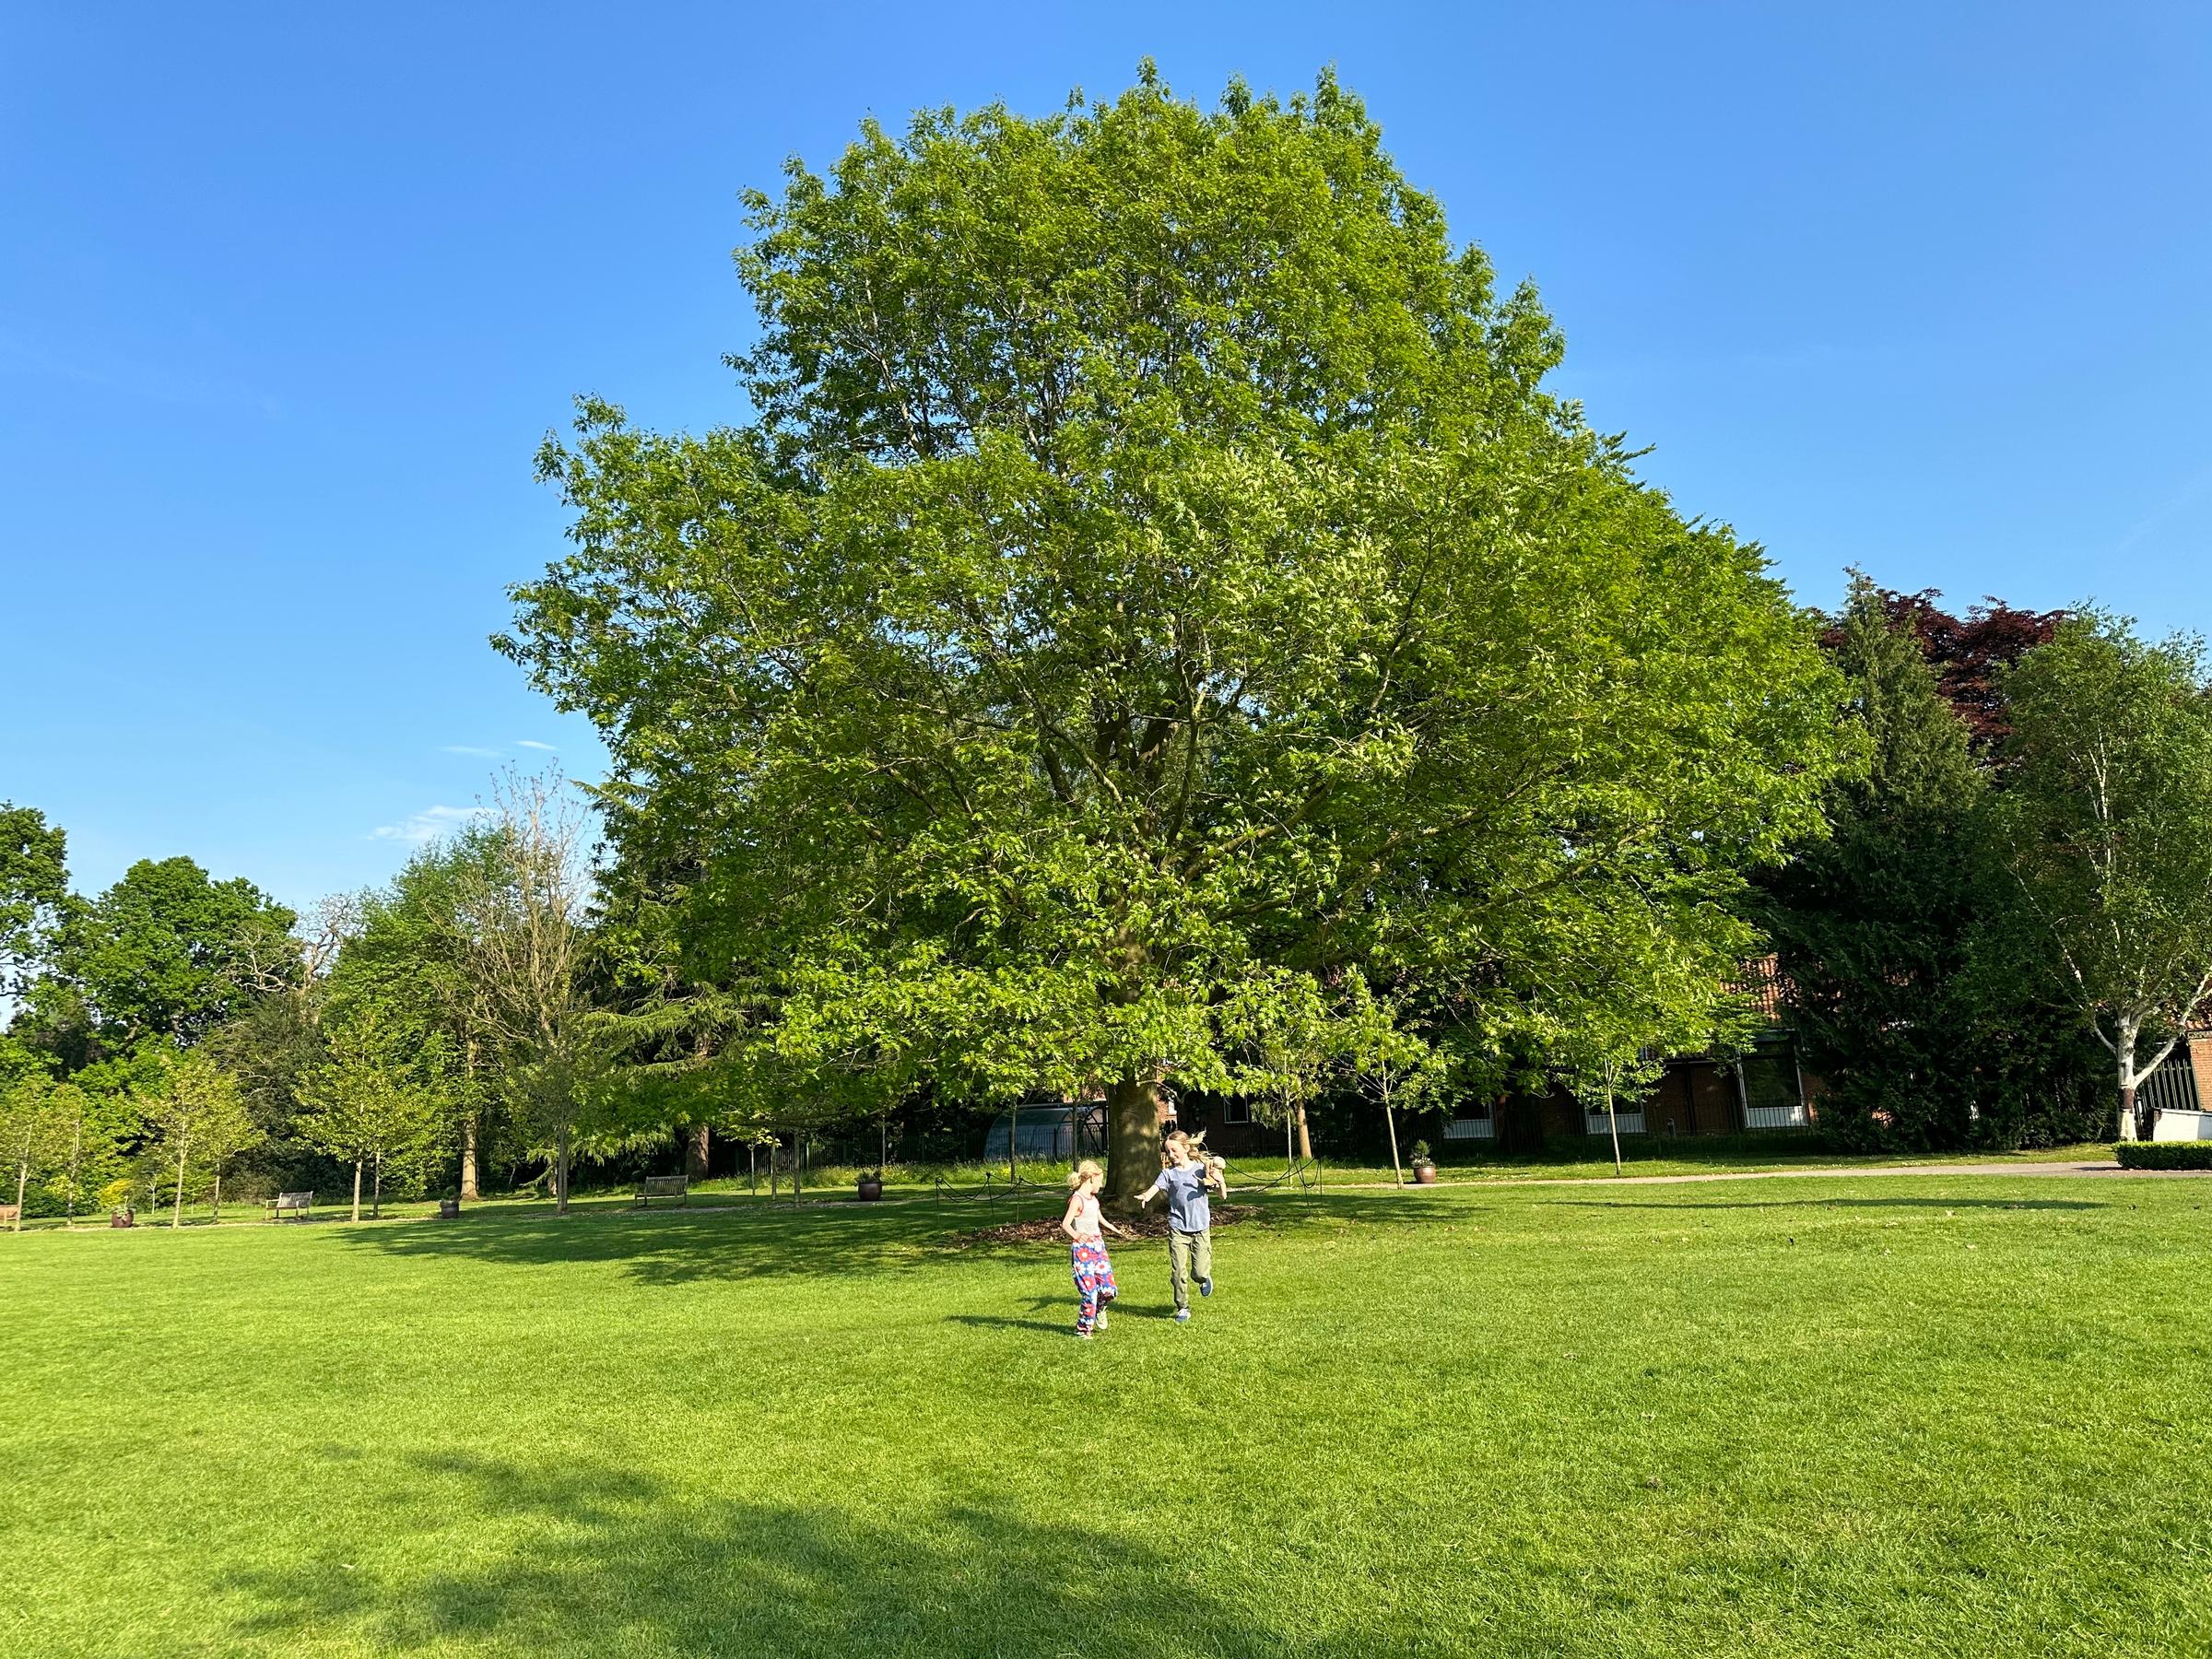 Children playing in Homestead park